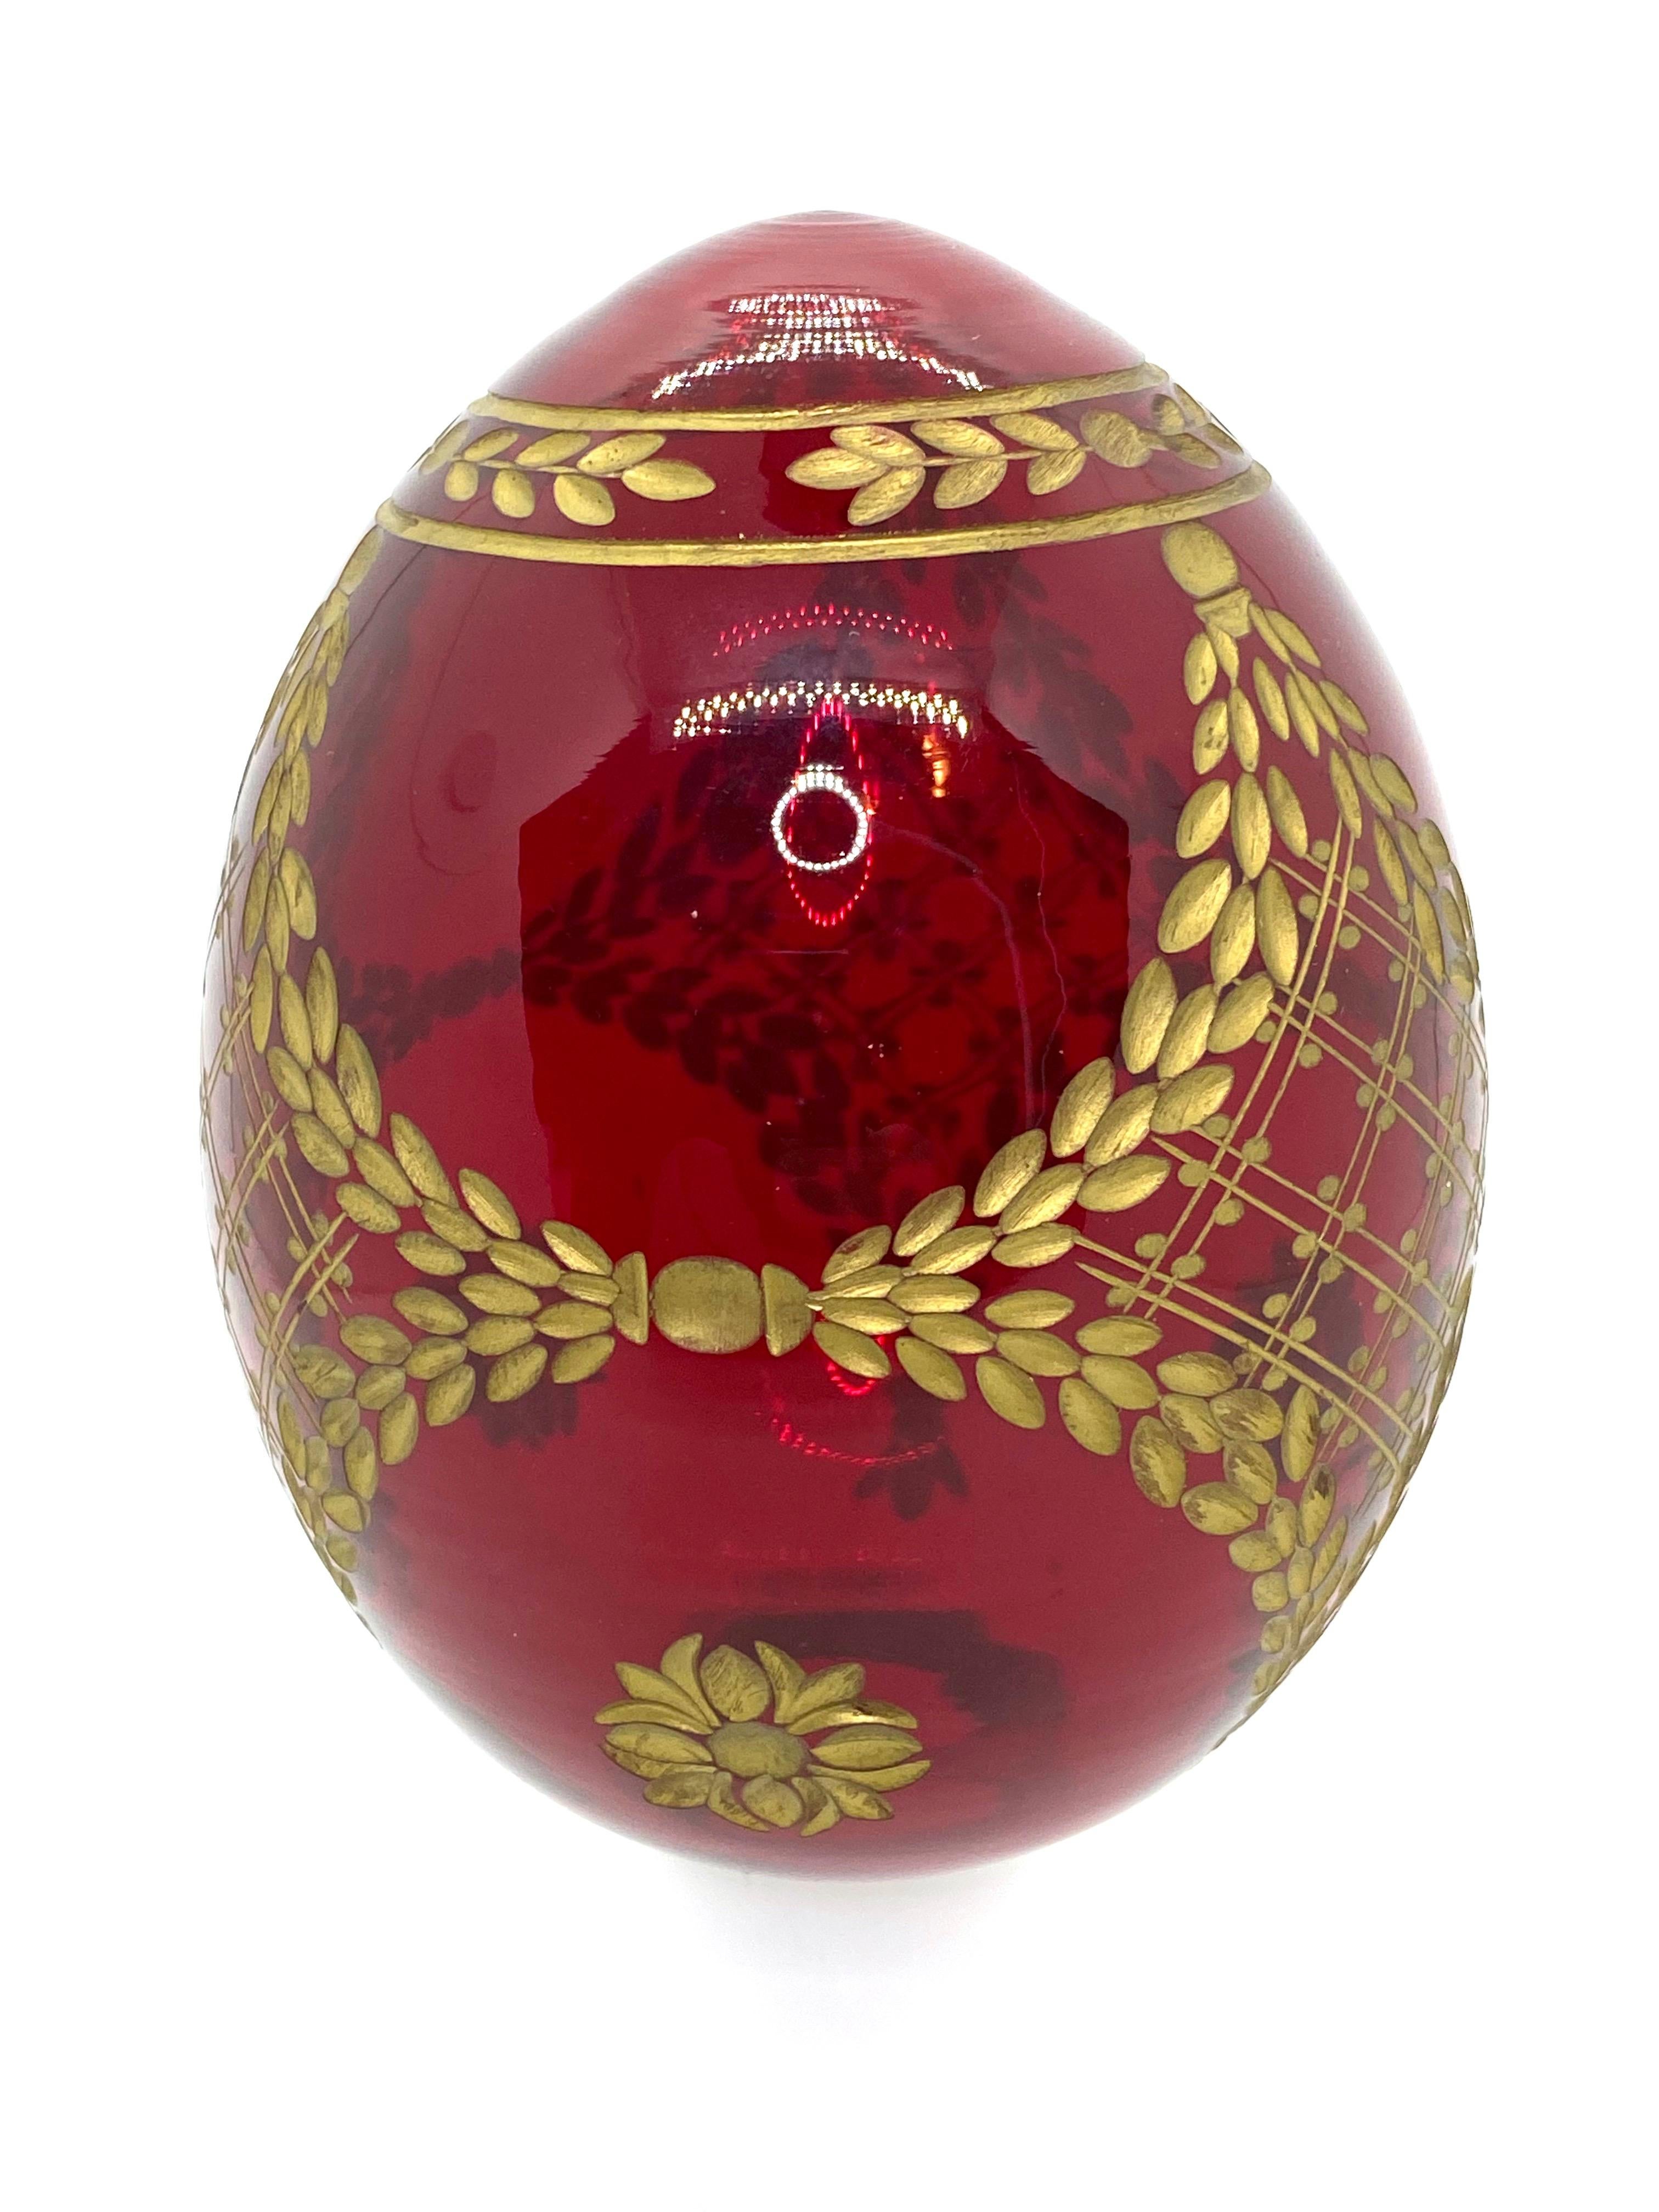 Art Nouveau Vintage Faberge Russia Style Ruby Red Glass Egg with Etched Royal Garnishment